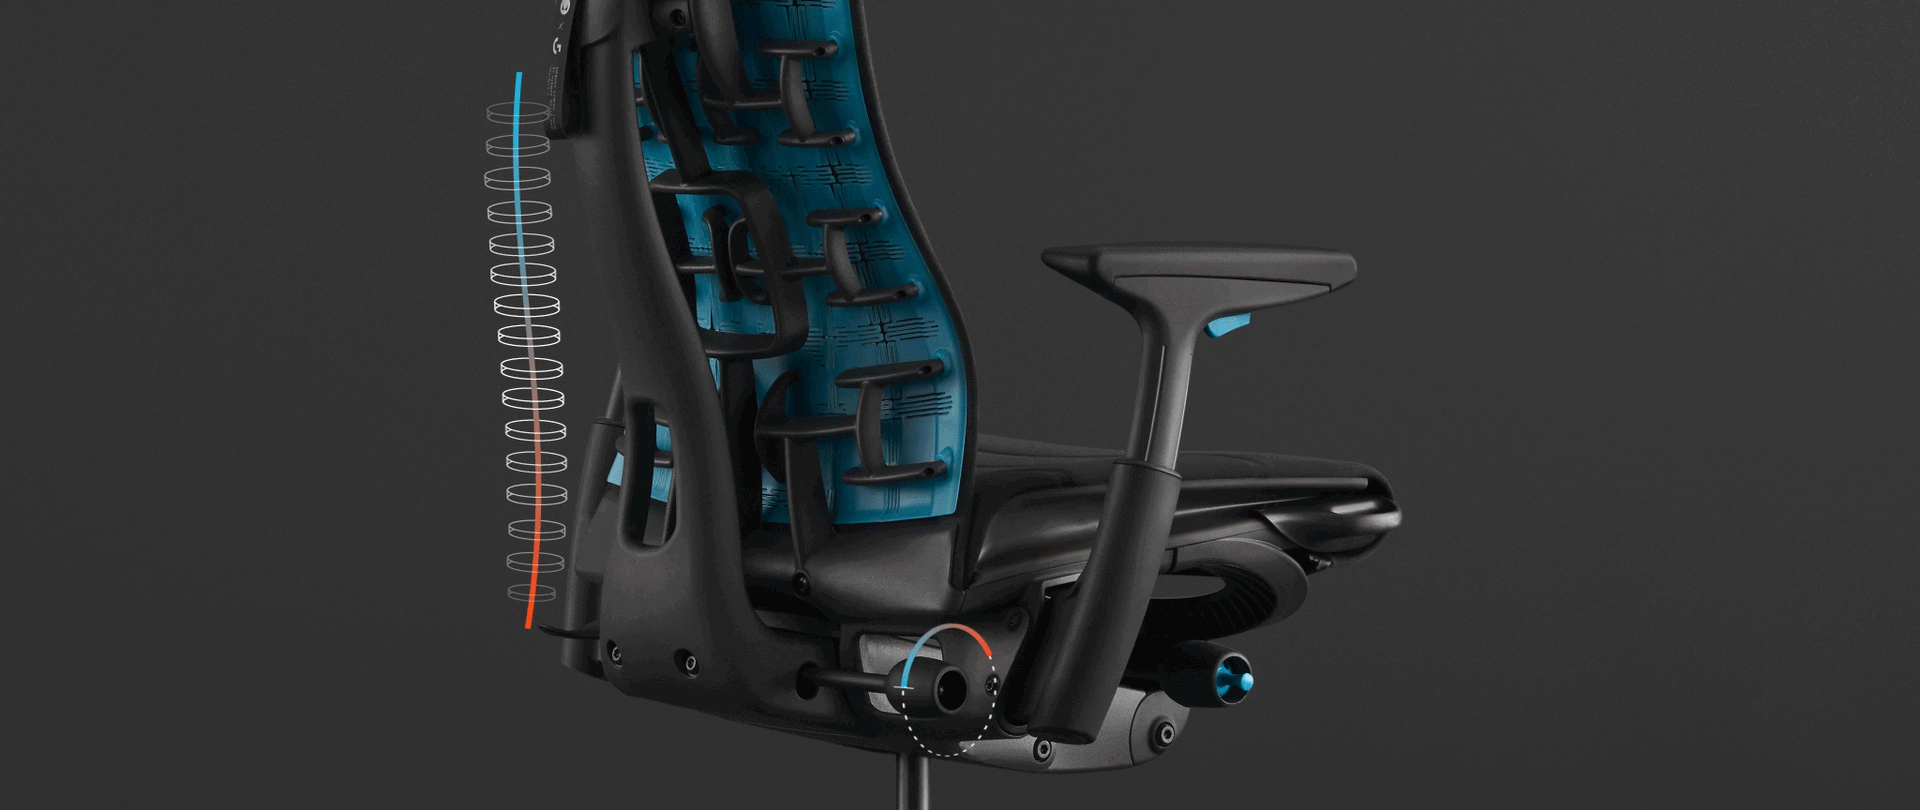 An animation highlighting the Embody Gaming Chair’s BackFit adjustment, overlaid on a photo of the chair on a black background.